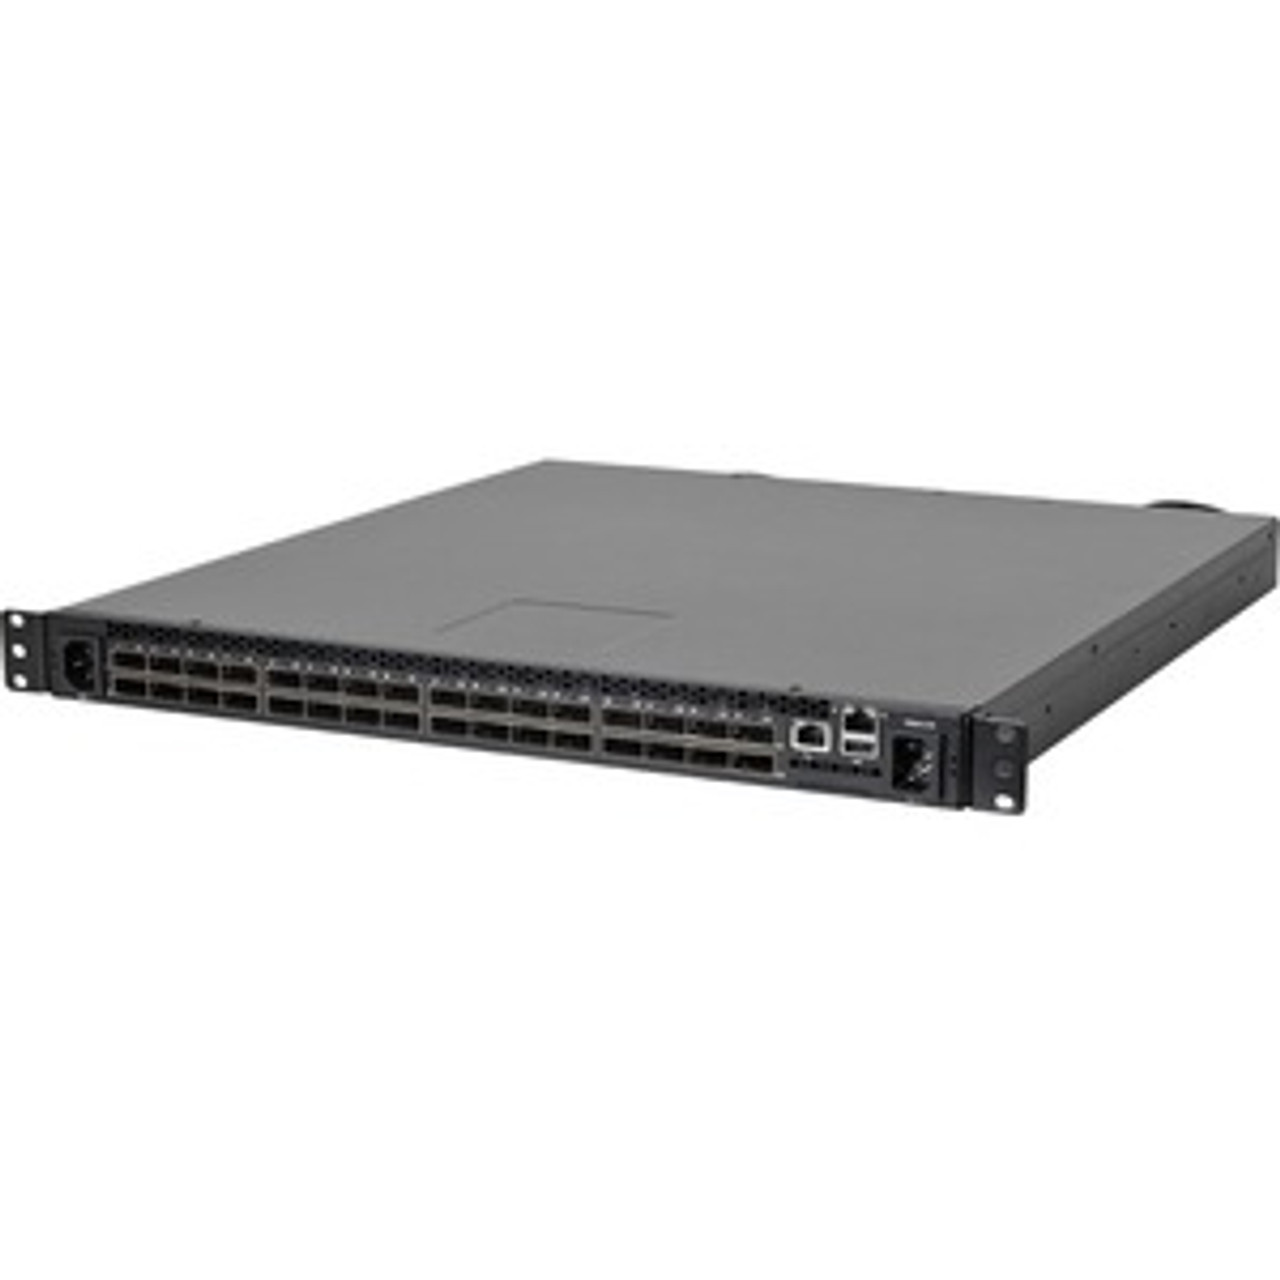 1LY6UZZ0003 QCT A Powerful Spine/Leaf Switch for Datacenter and Cloud Computing - Manageable - 40 Gigabit Ethernet - 3 Layer Supported - Modular - Power Supply